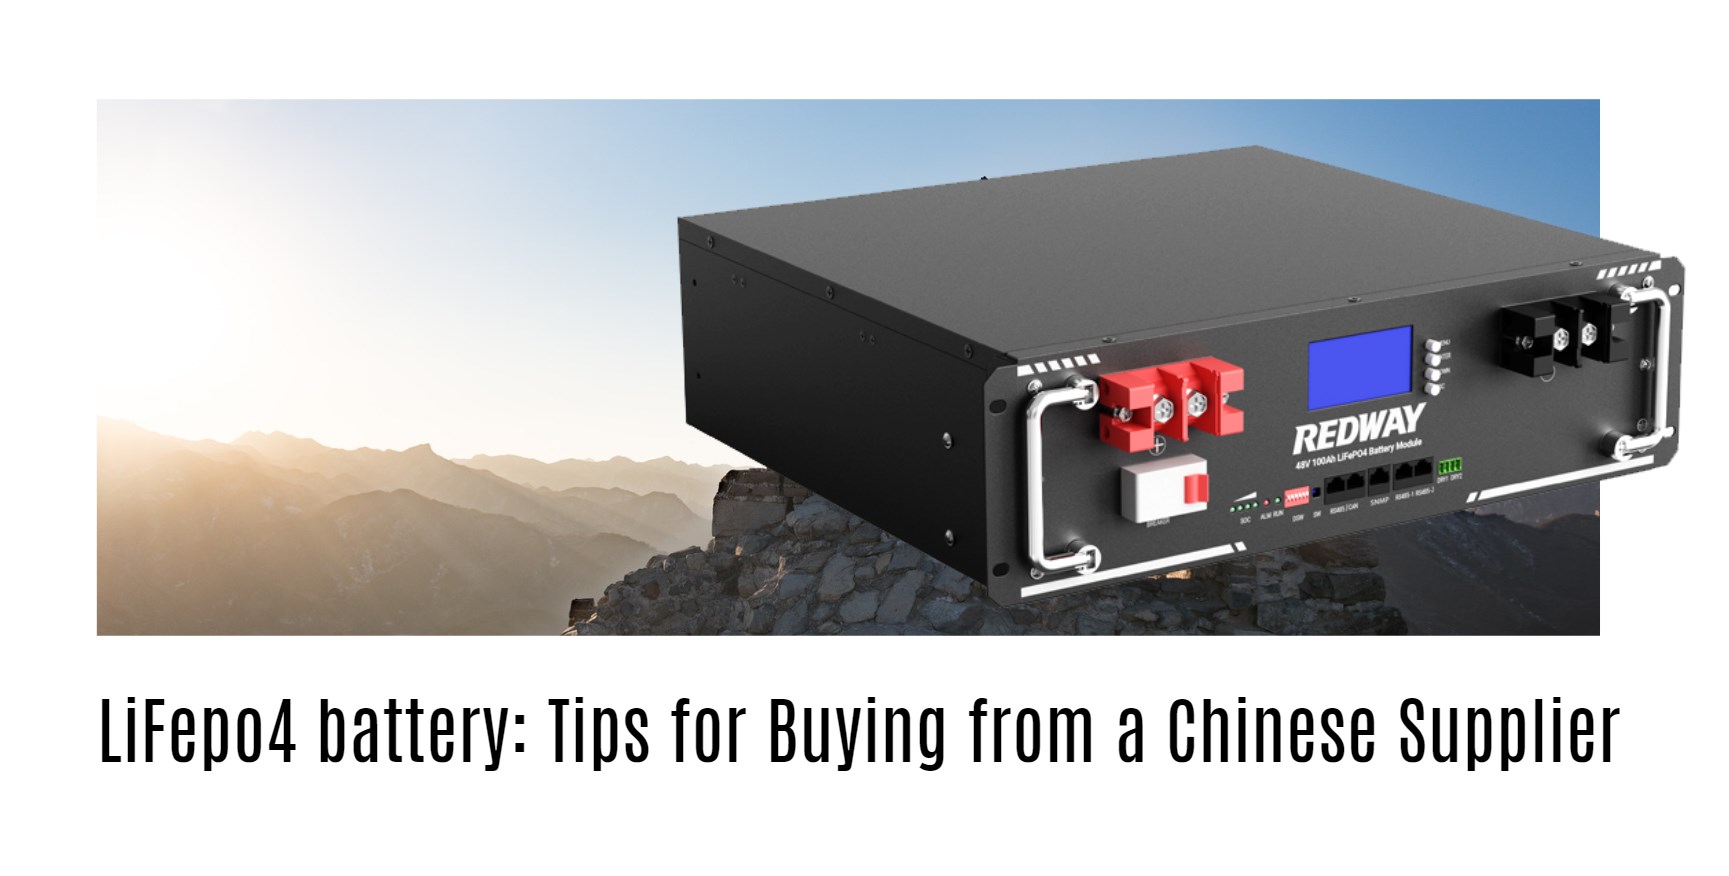 LiFepo4 battery: Tips for Buying from a Chinese Supplier. server rack battery factory